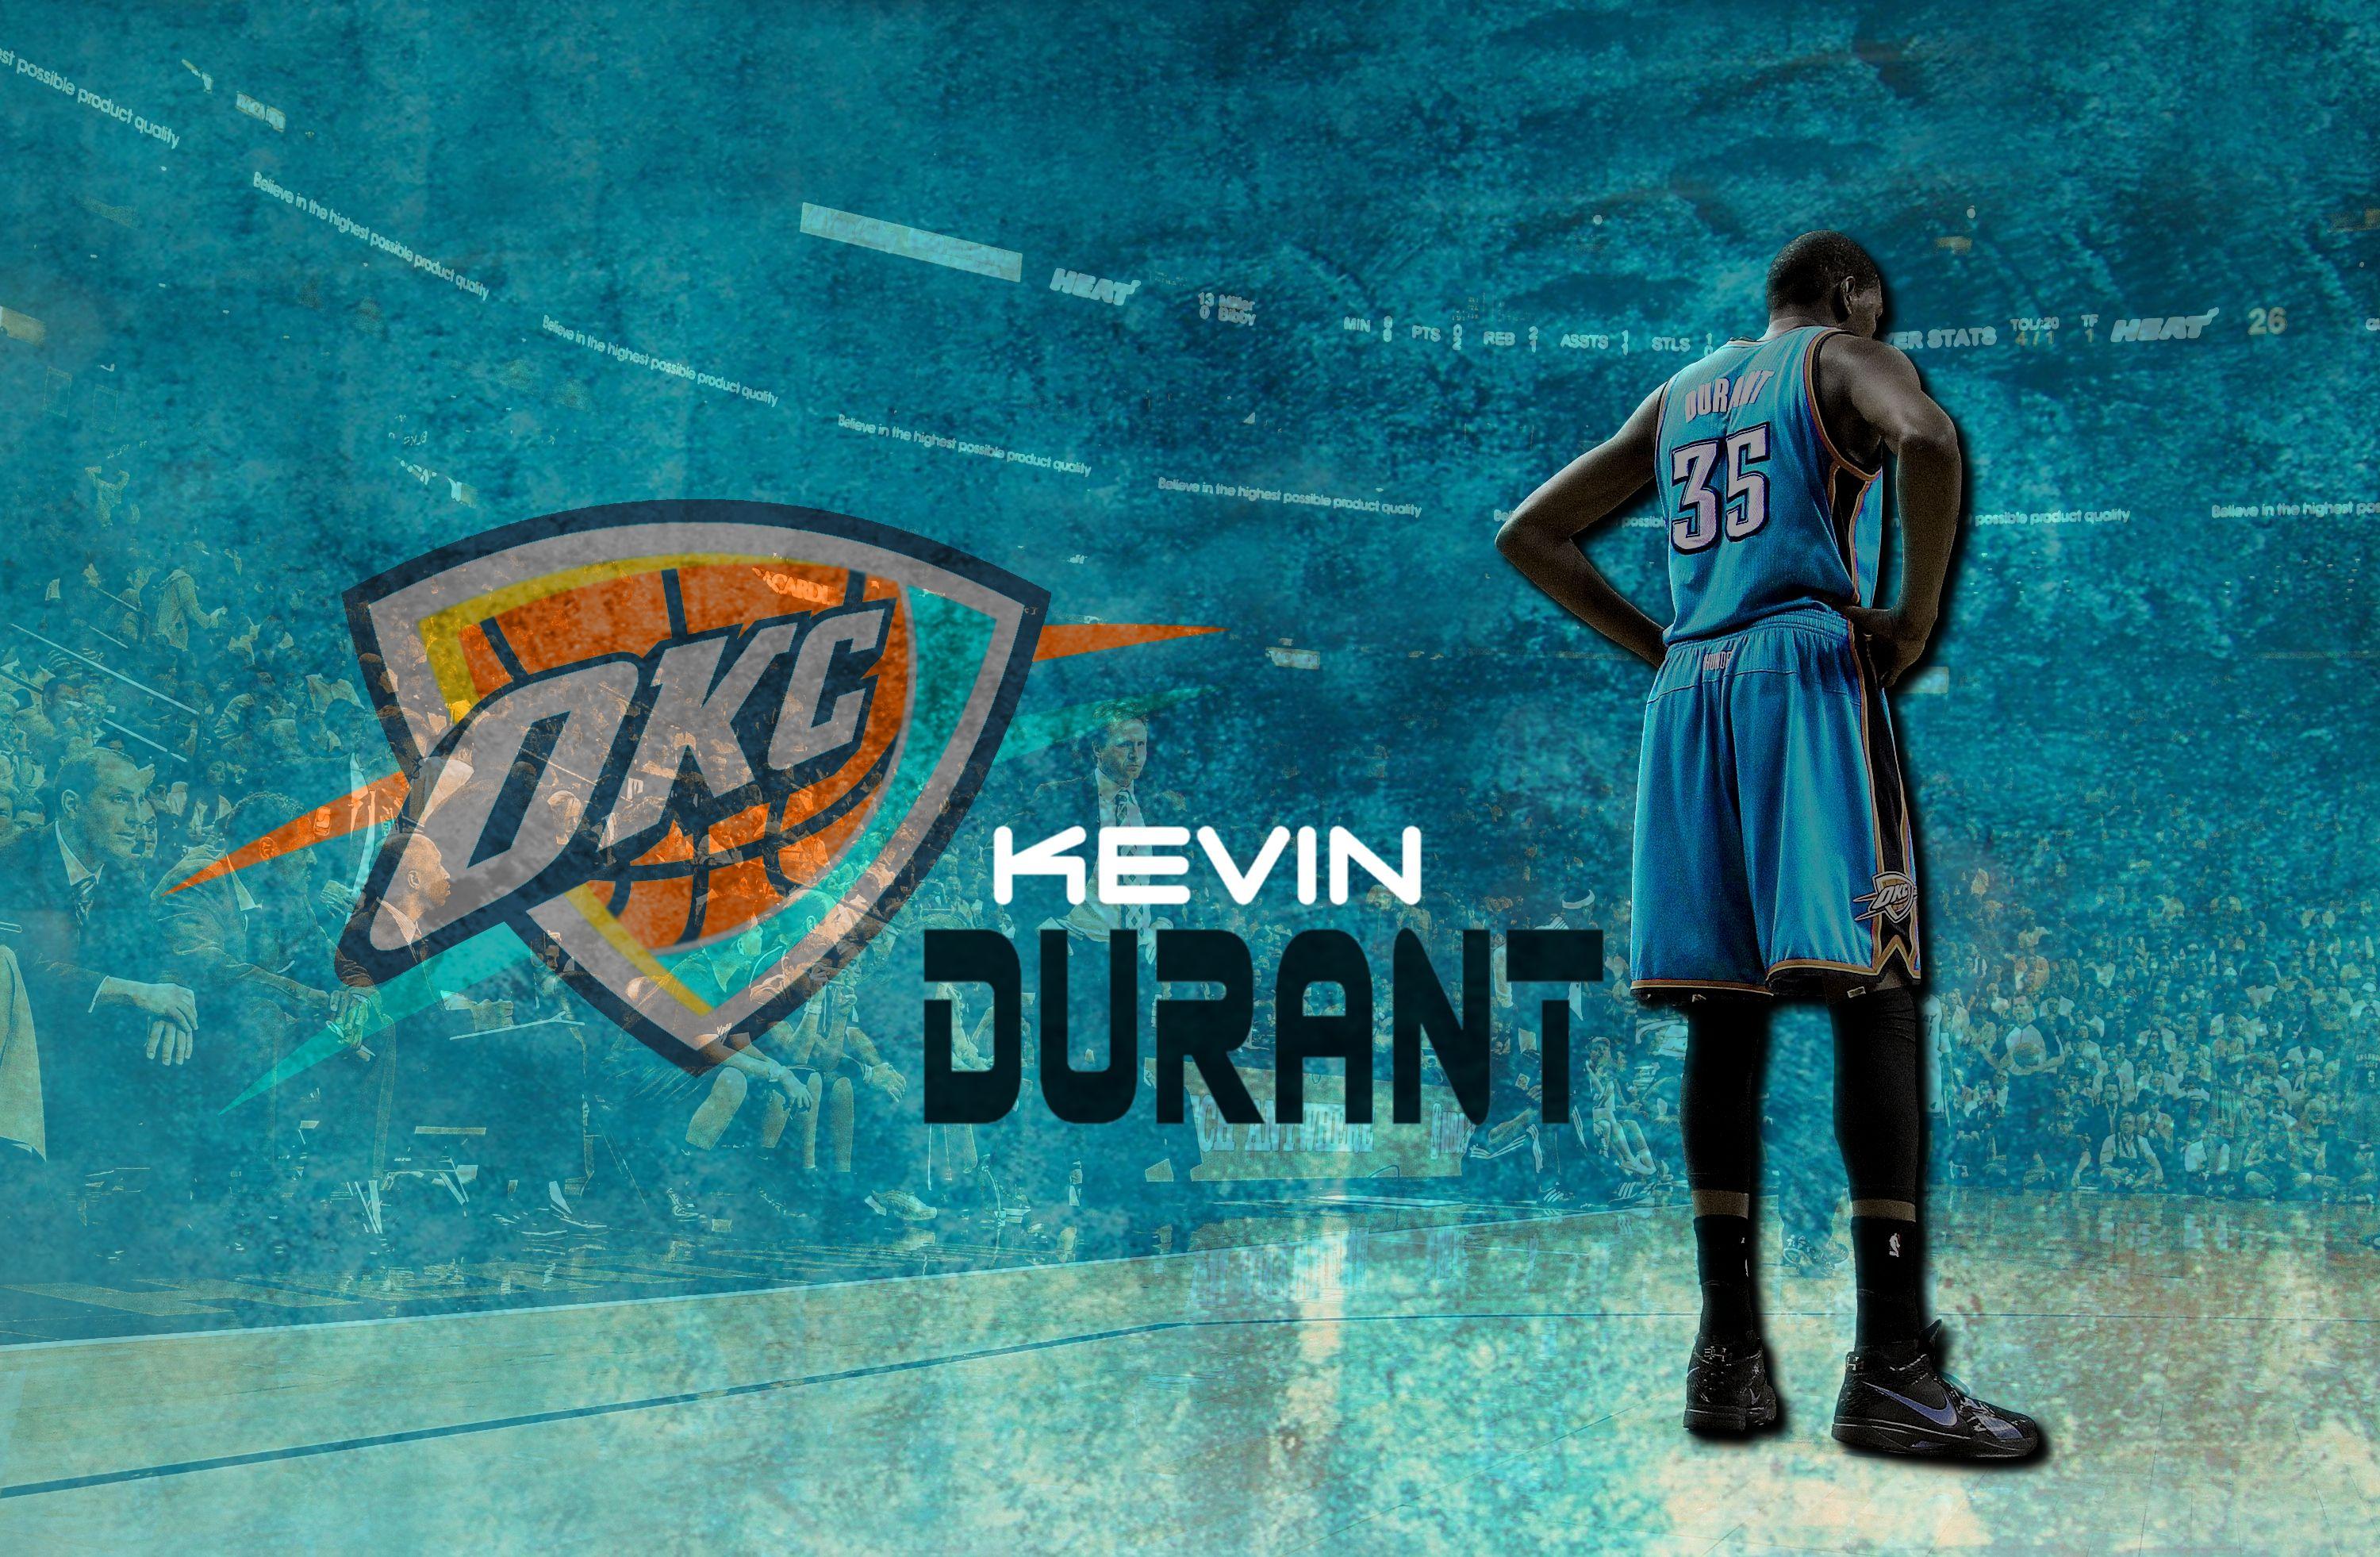 Top 999+ Kevin Durant Wallpaper Full HD, 4K✓Free to Use